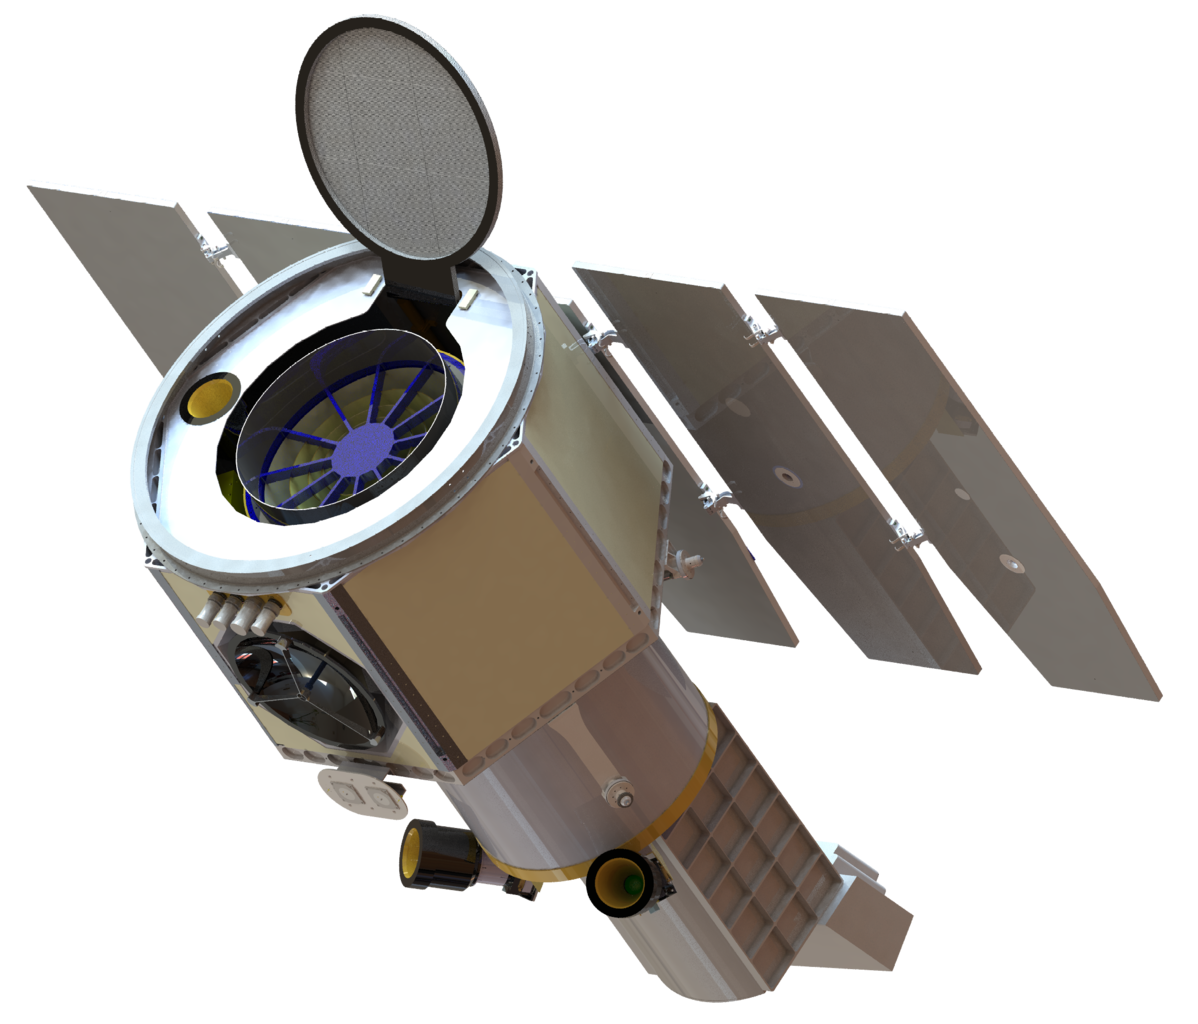 Spacecraft PNG High Quality Image